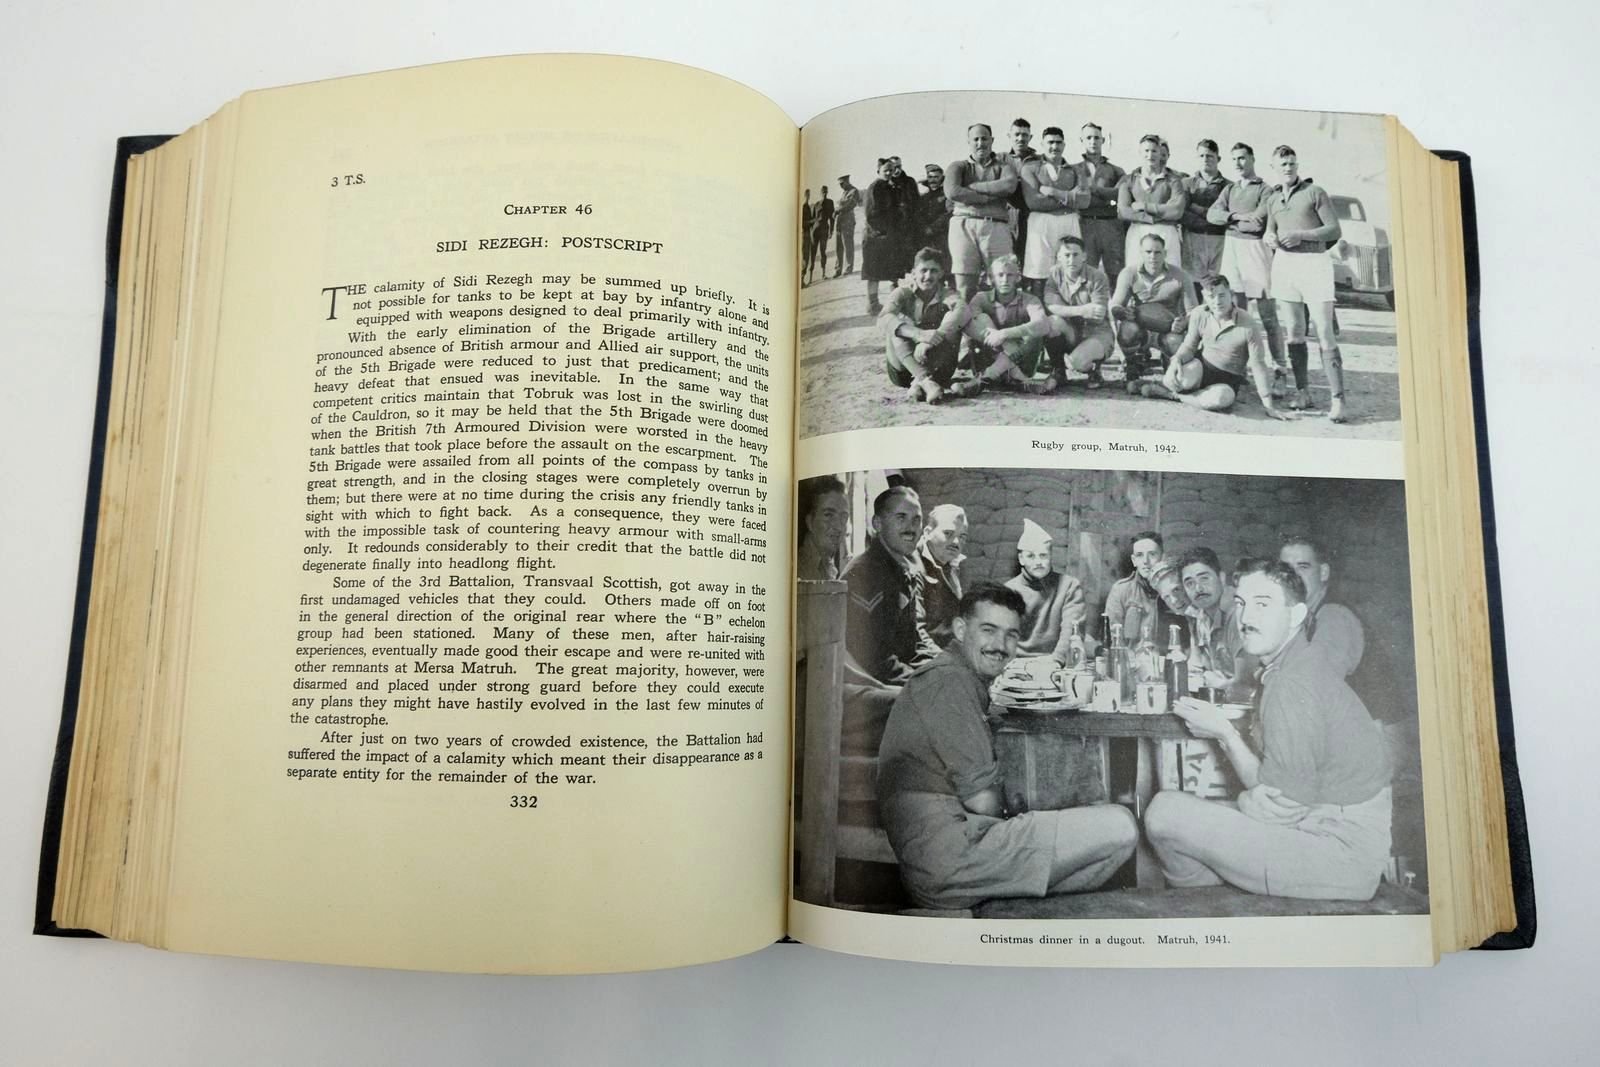 Photo of THE SAGA OF THE TRANSVAAL SCOTTISH REGIMENT 1932-1950 written by Birkby, Carel published by Howard Timmins, Hodder & Stoughton (STOCK CODE: 2135410)  for sale by Stella & Rose's Books